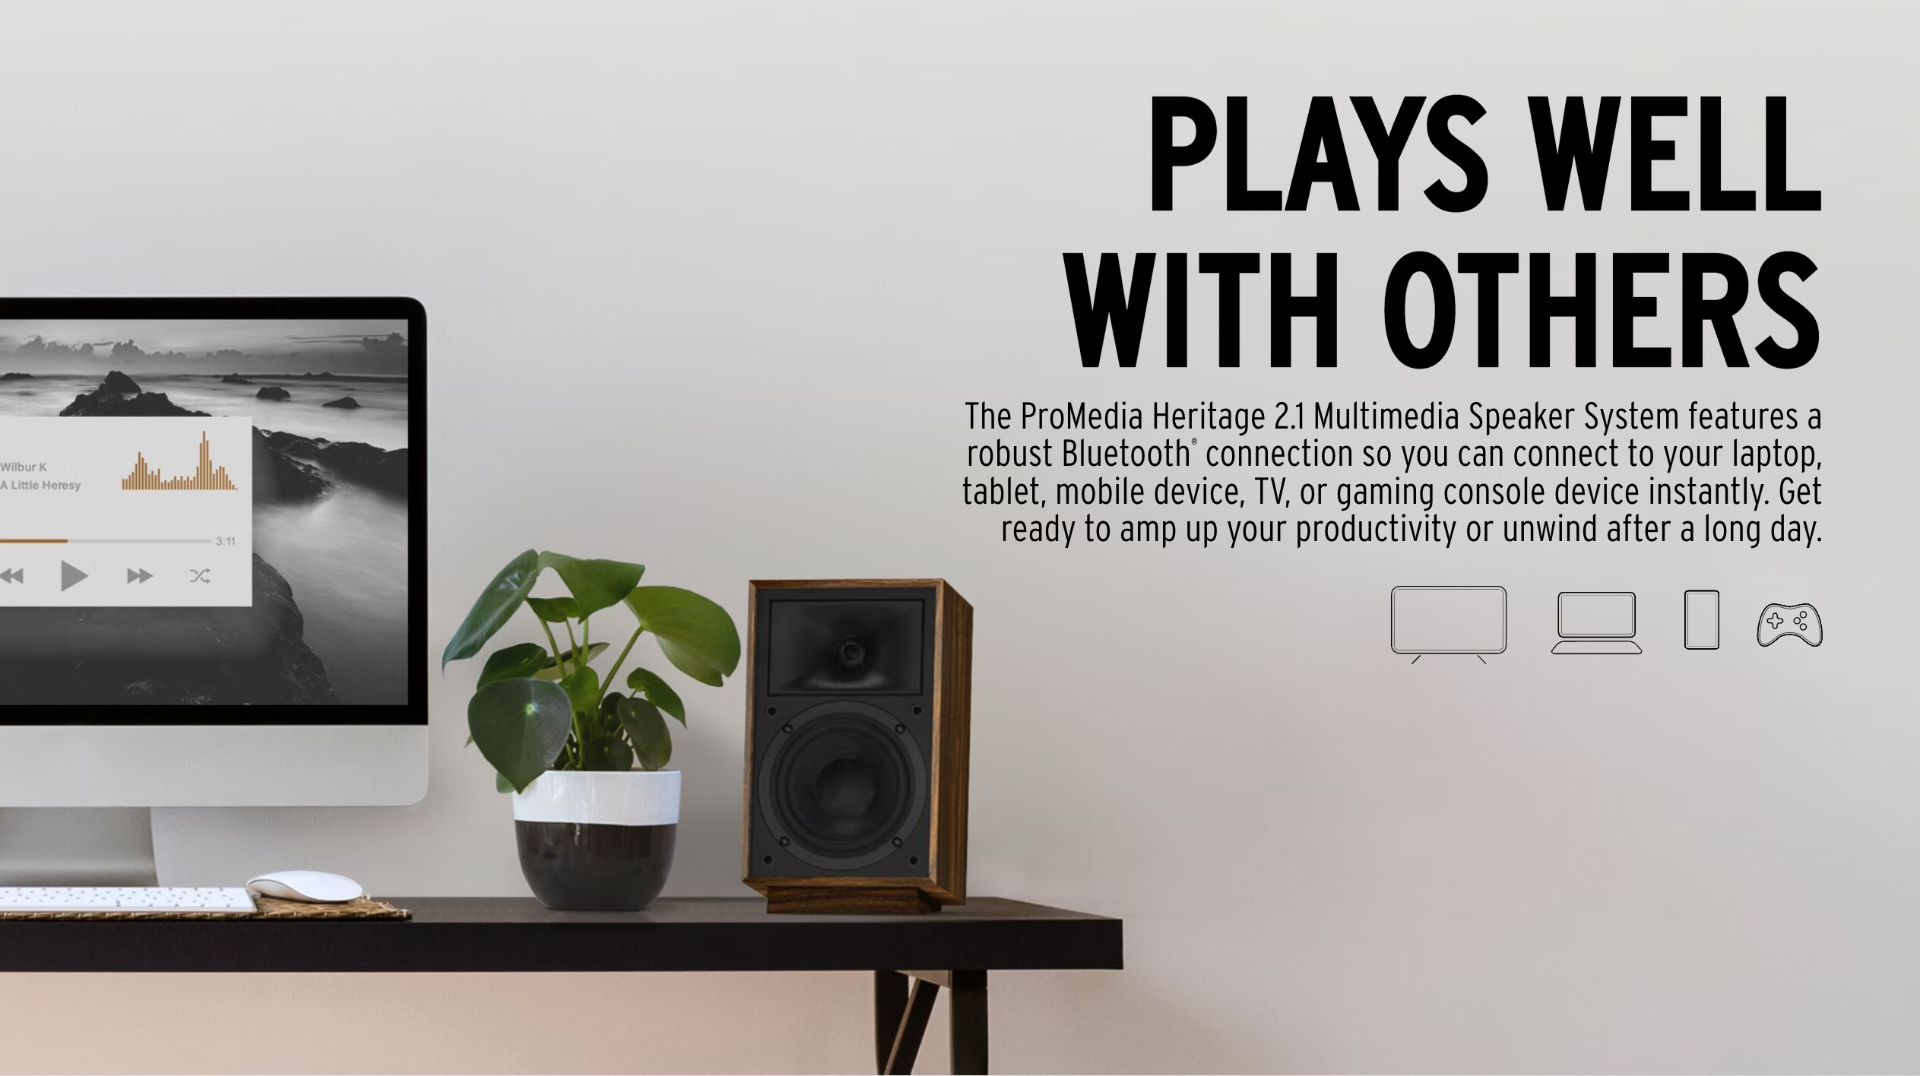 The ProMedia Heritage 2.1 Multimedia Speaker System features a robust Bluetooth connection so you can connect to your laptop, tablet, mobile device, TV, or gaming console device instantly. Get ready to amp up your productivity or unwind after a long day.